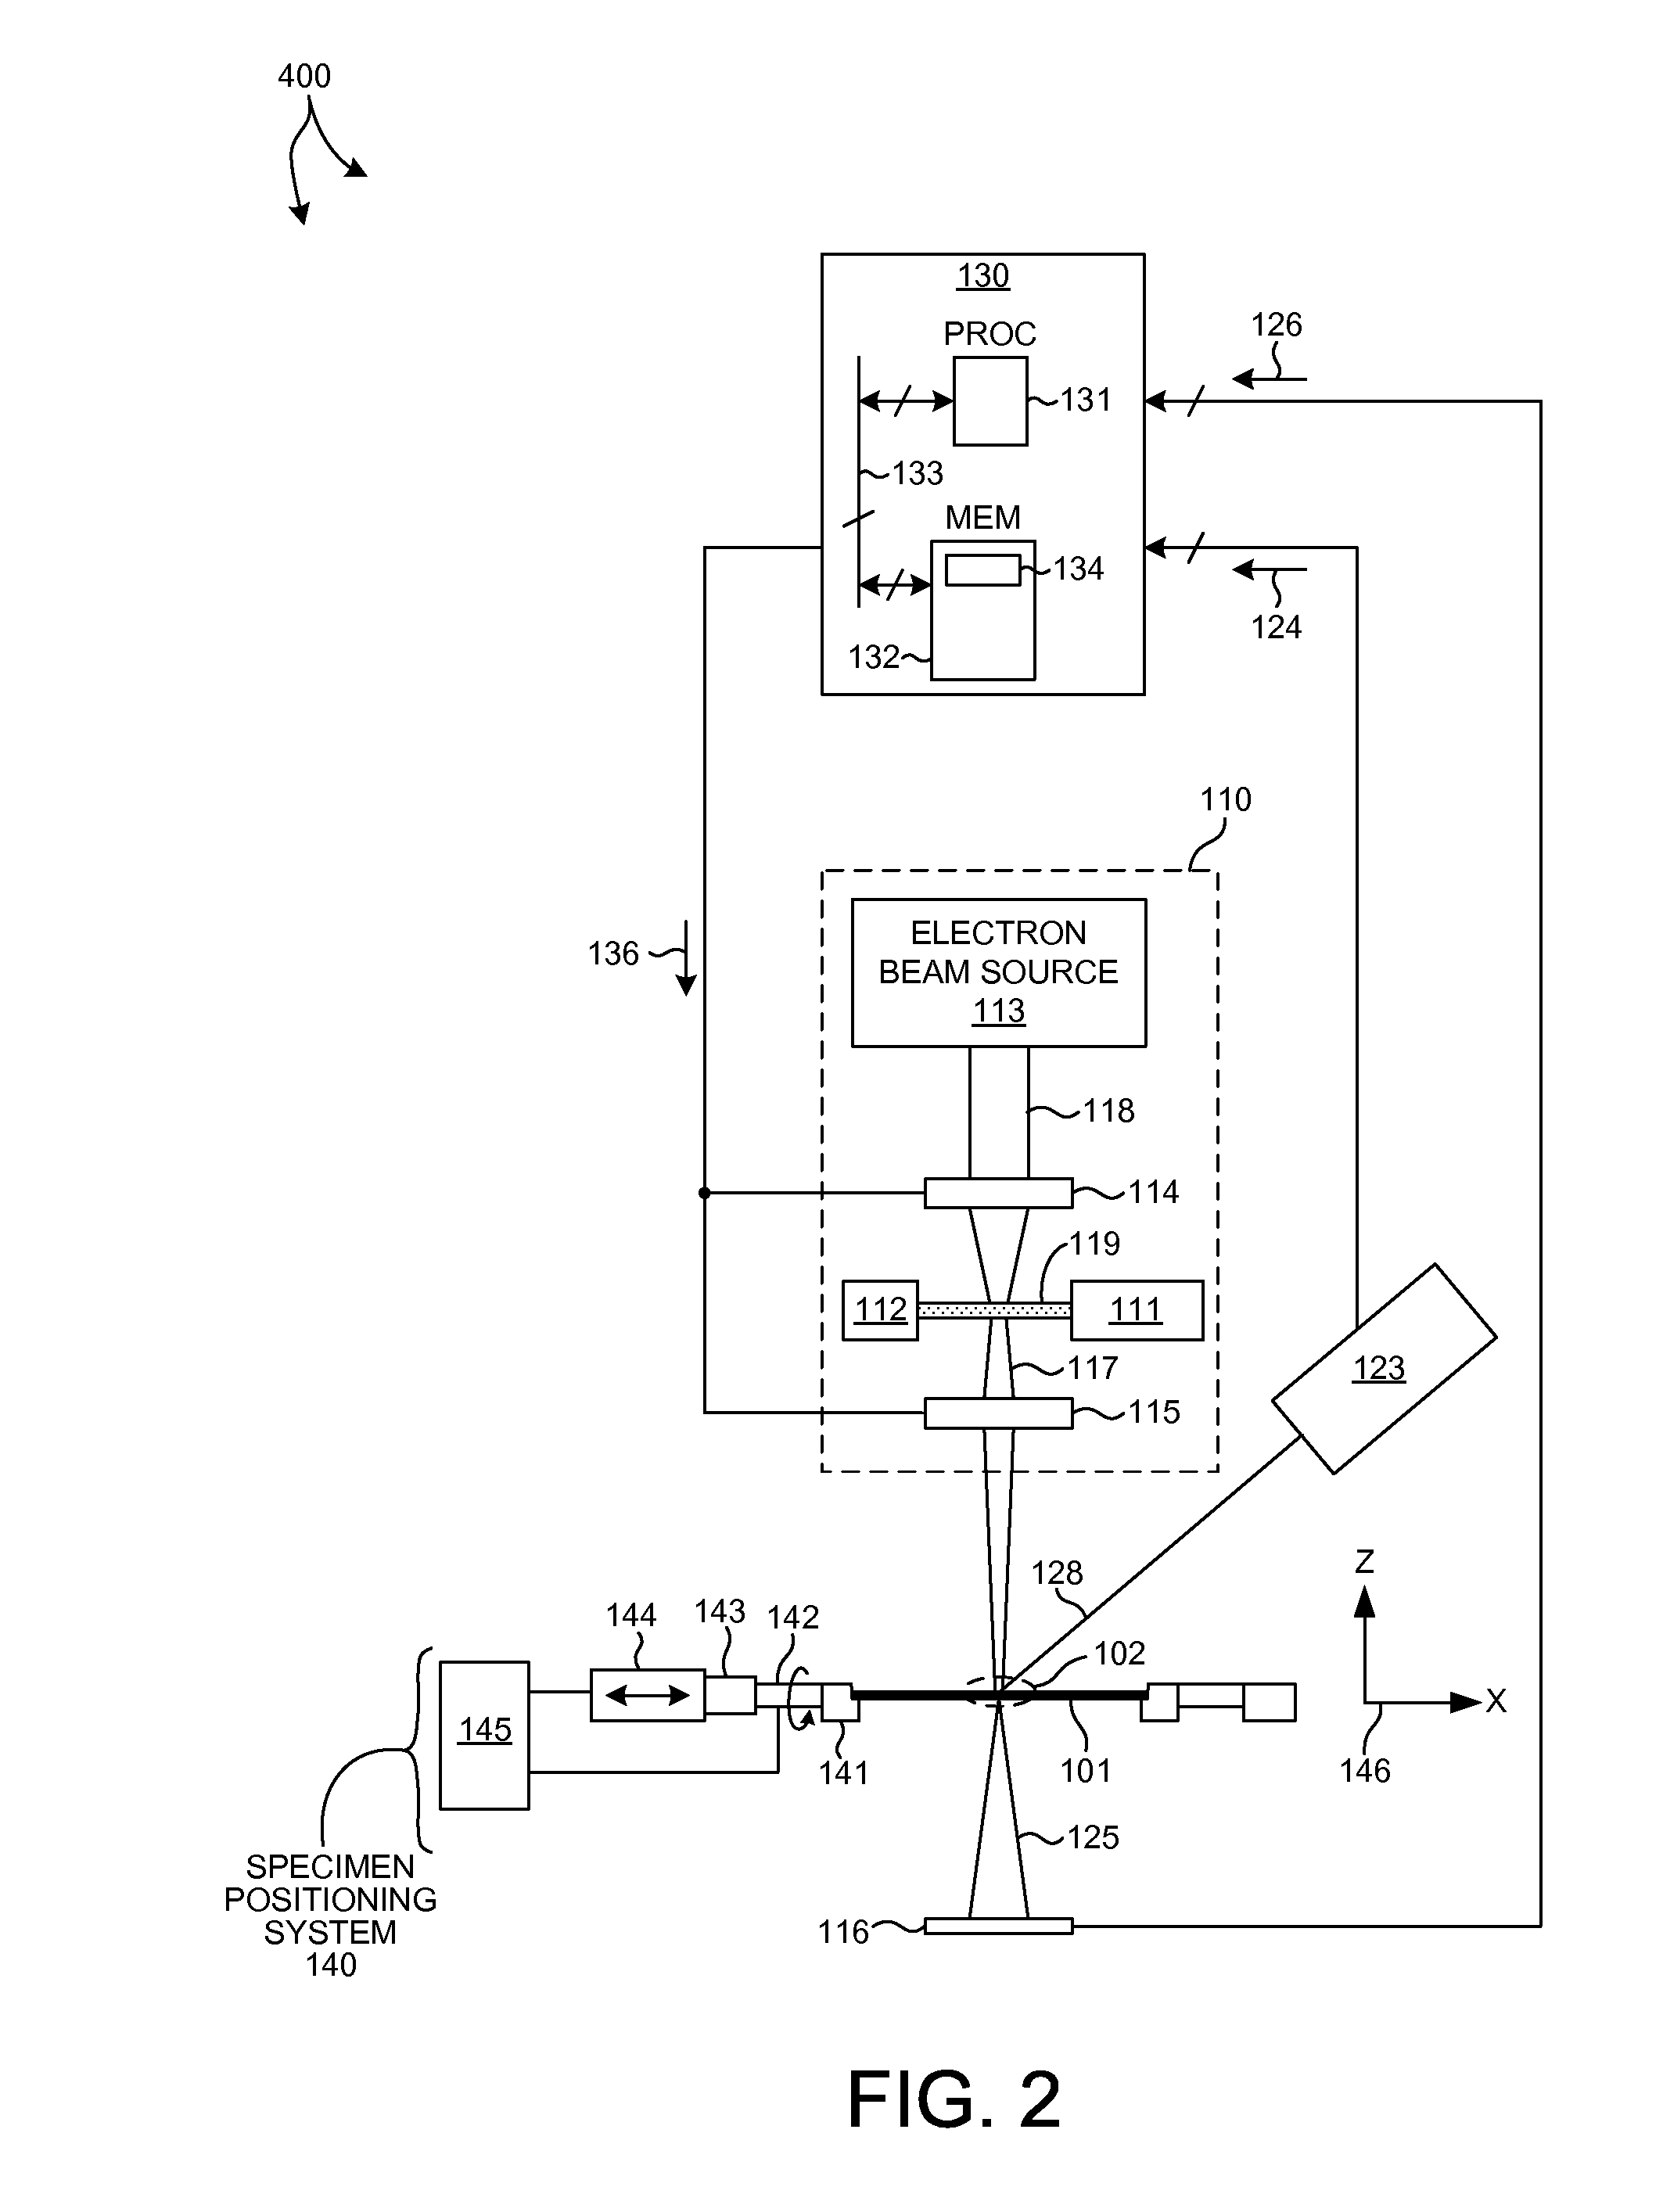 Metrology Tool With Combined XRF And SAXS Capabilities